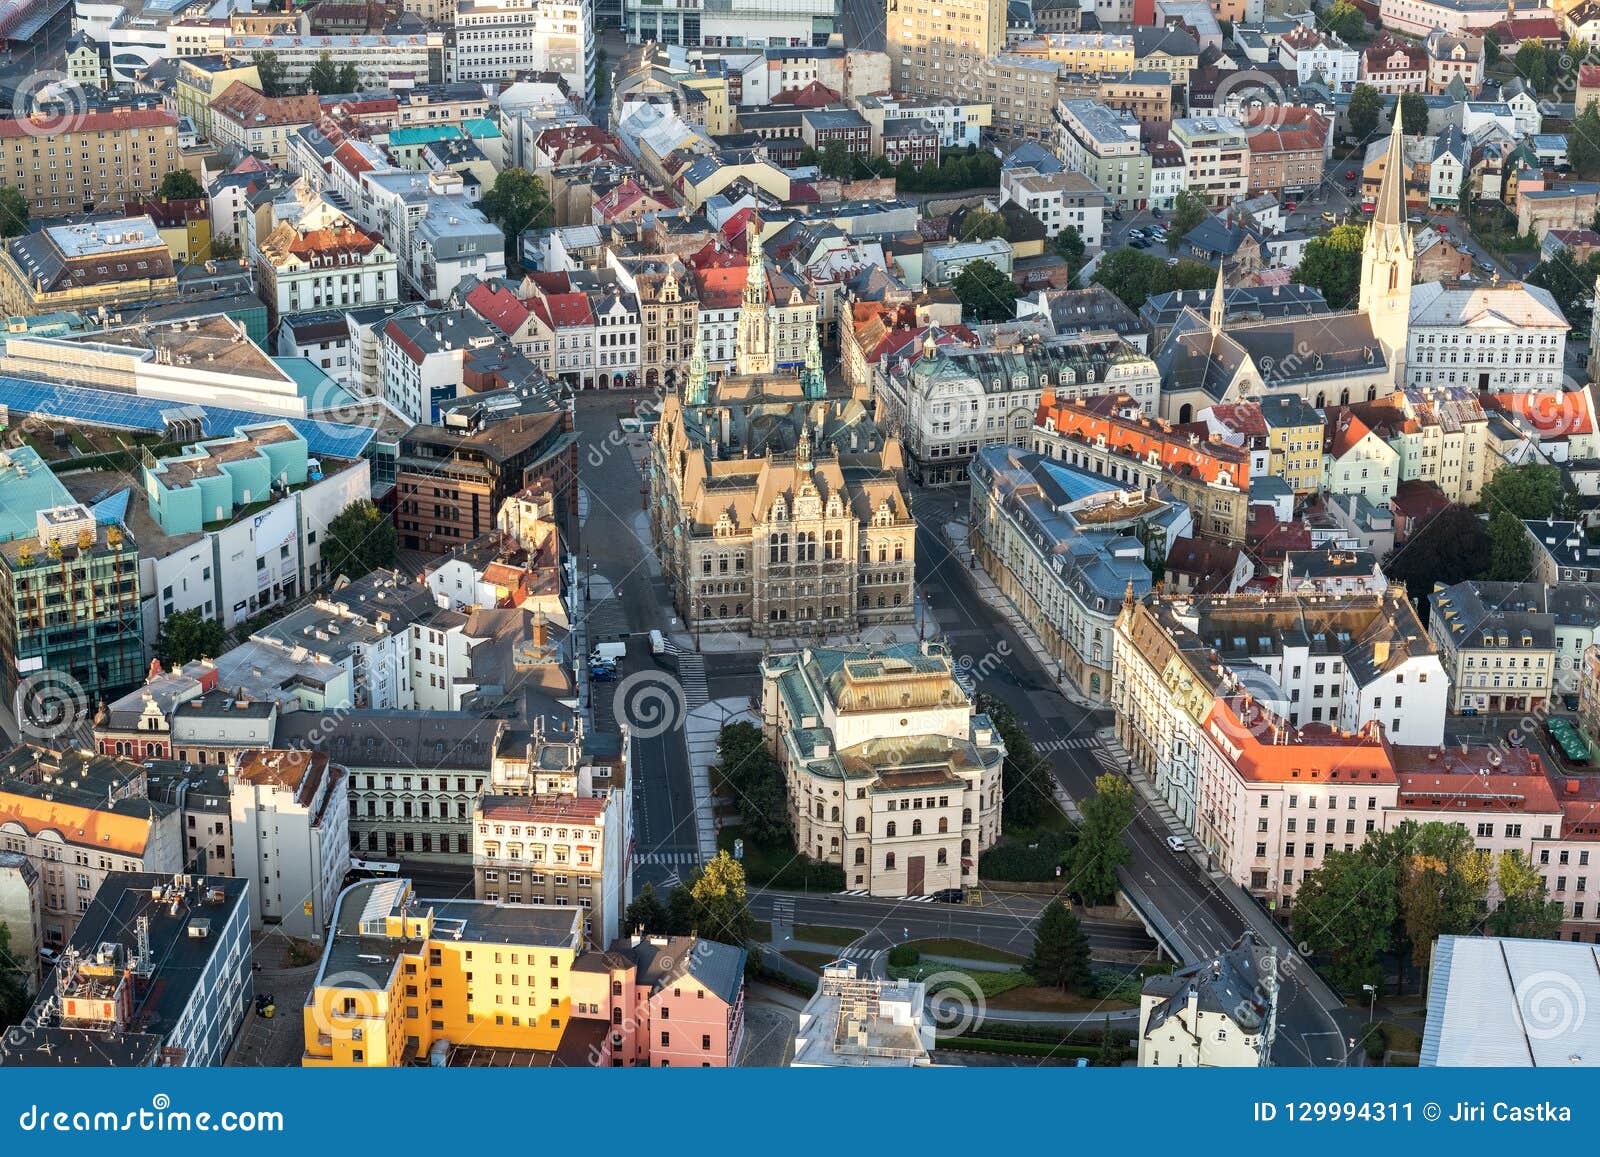 town hallm theathre and the city center of liberec. aerial shot